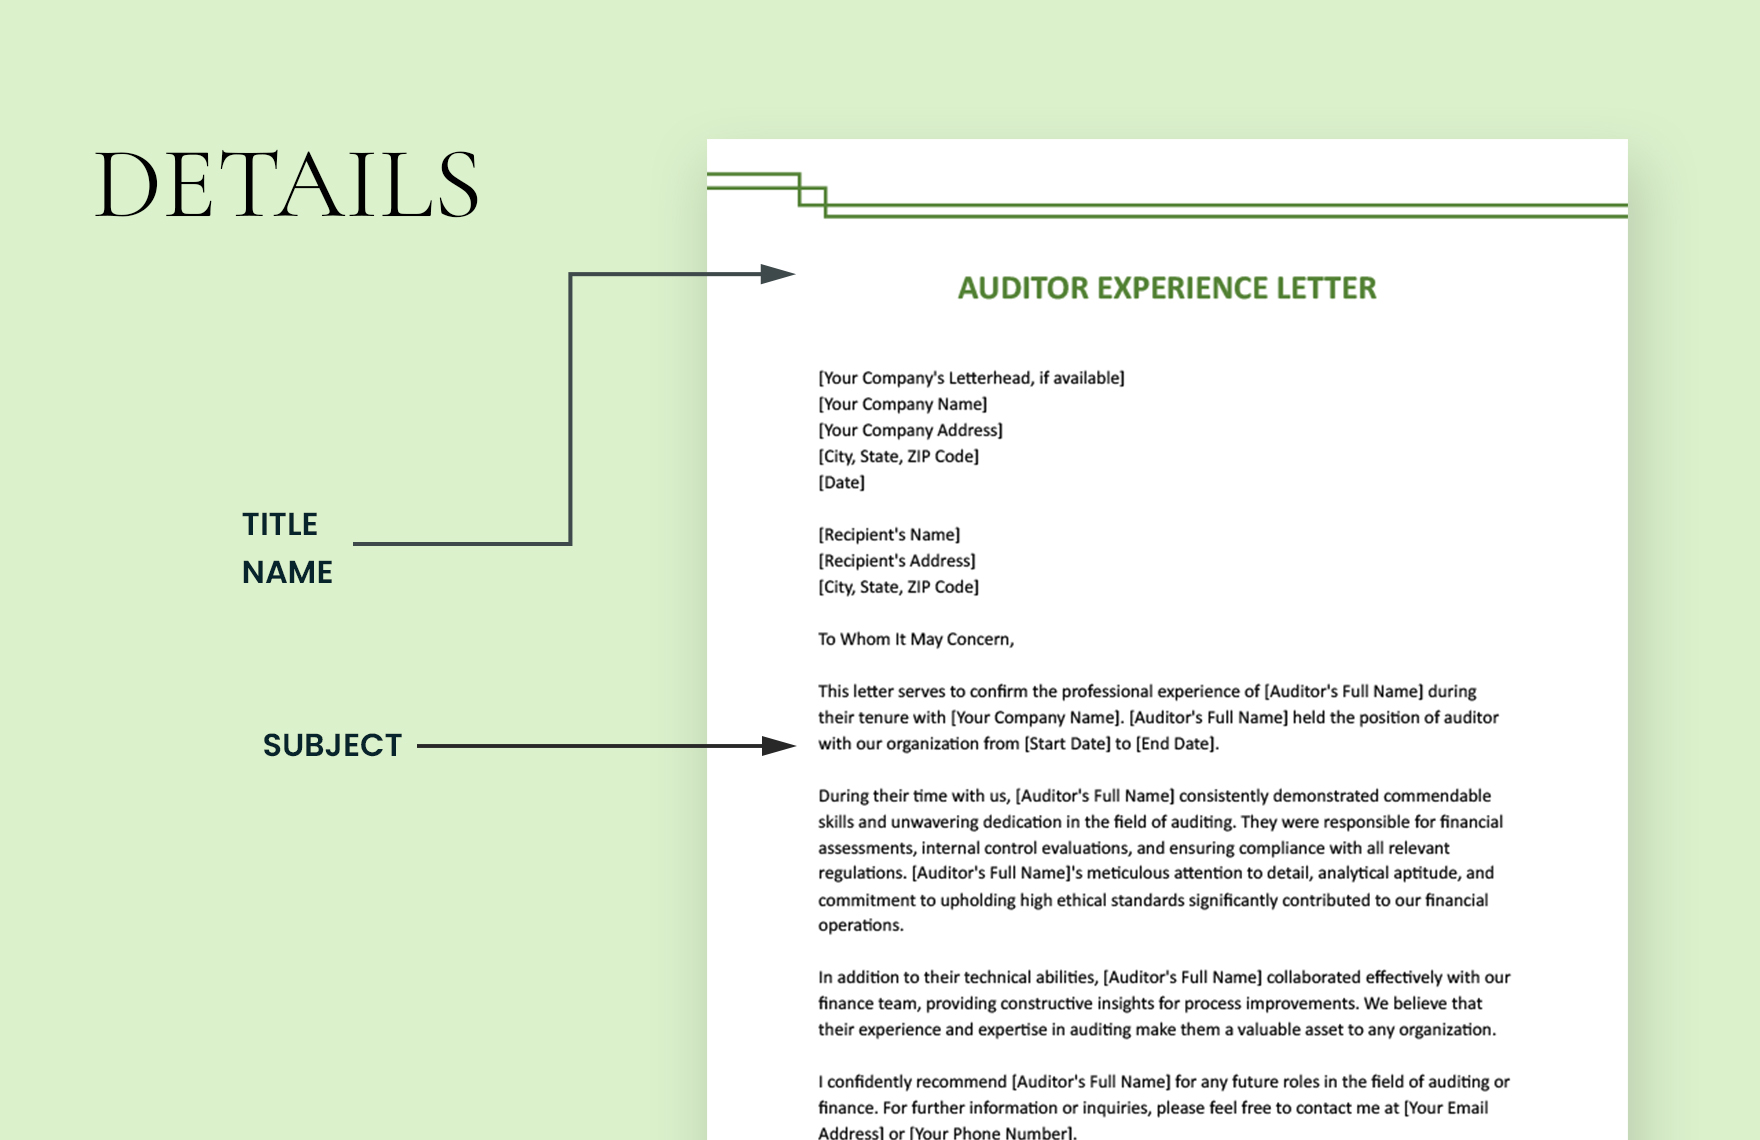 Auditor Experience Letter